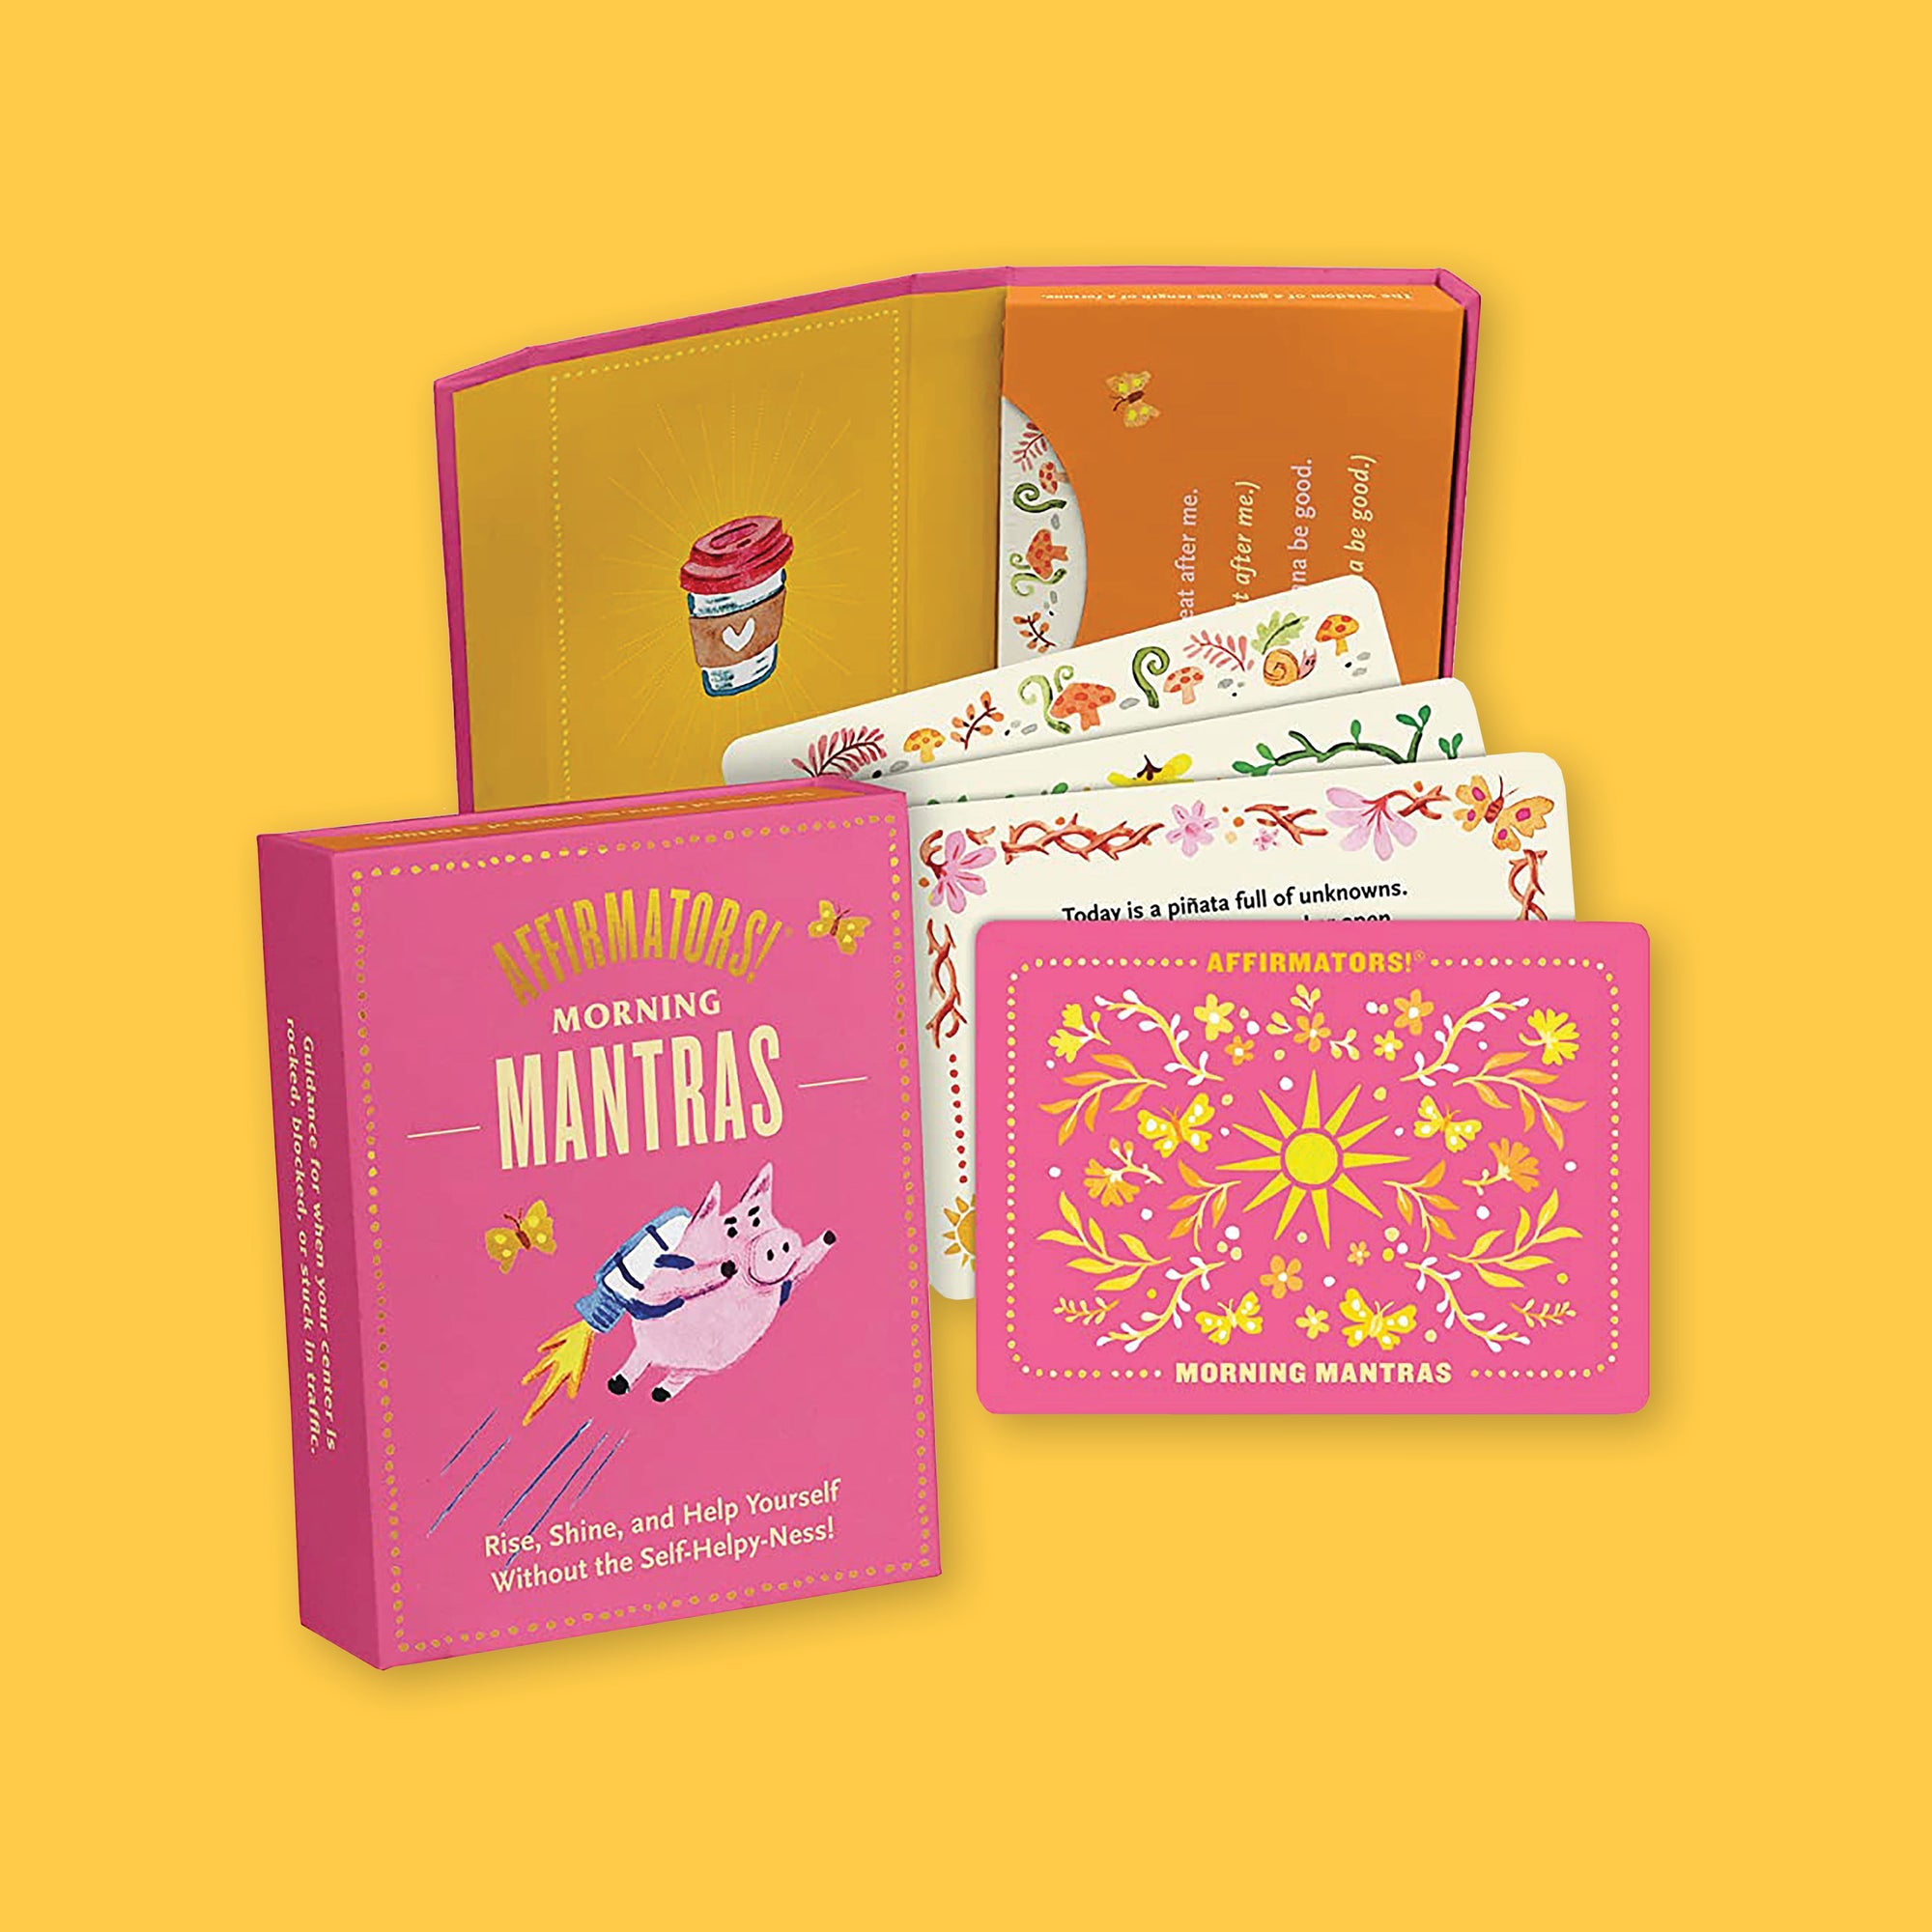 On a sunny mustard background sits a hot pink deck of cards box. It has an illustration of a pig with a rocket on it's back. It says "AFFIRMATORS! MORNING MANTRAS" in gold and yellow, all caps font. It also say "Rise, Shine, and Help Yourself Without the Self-Helpy-Ness!" in yellow font. To the right is an open case with cards in it and four cards laid out below it. The case has an illustration of a to-go coffee cup with a pink lid and a heart on the front. The cards have various colorful illustrations.